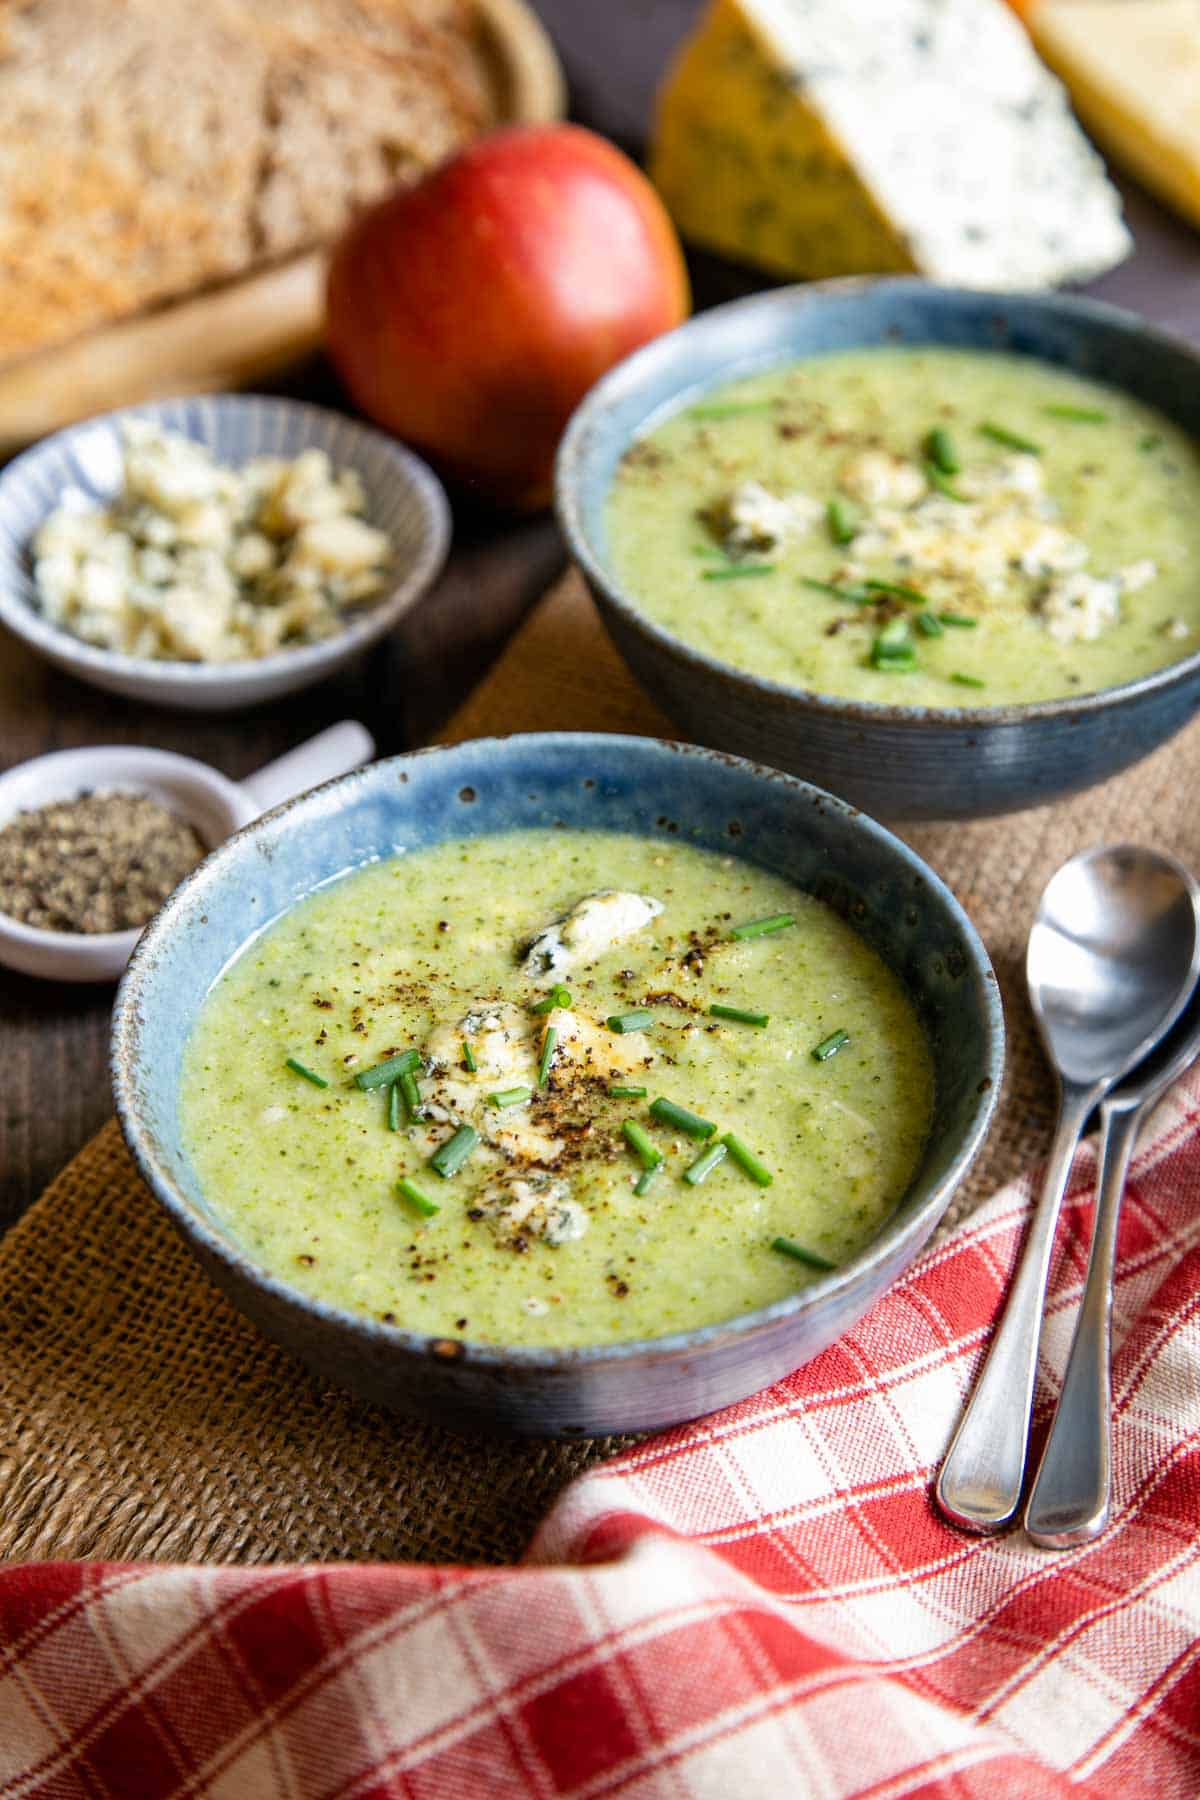 Dishes of enticing green broccoli and stilton soup, served with cheese, apples and toast.